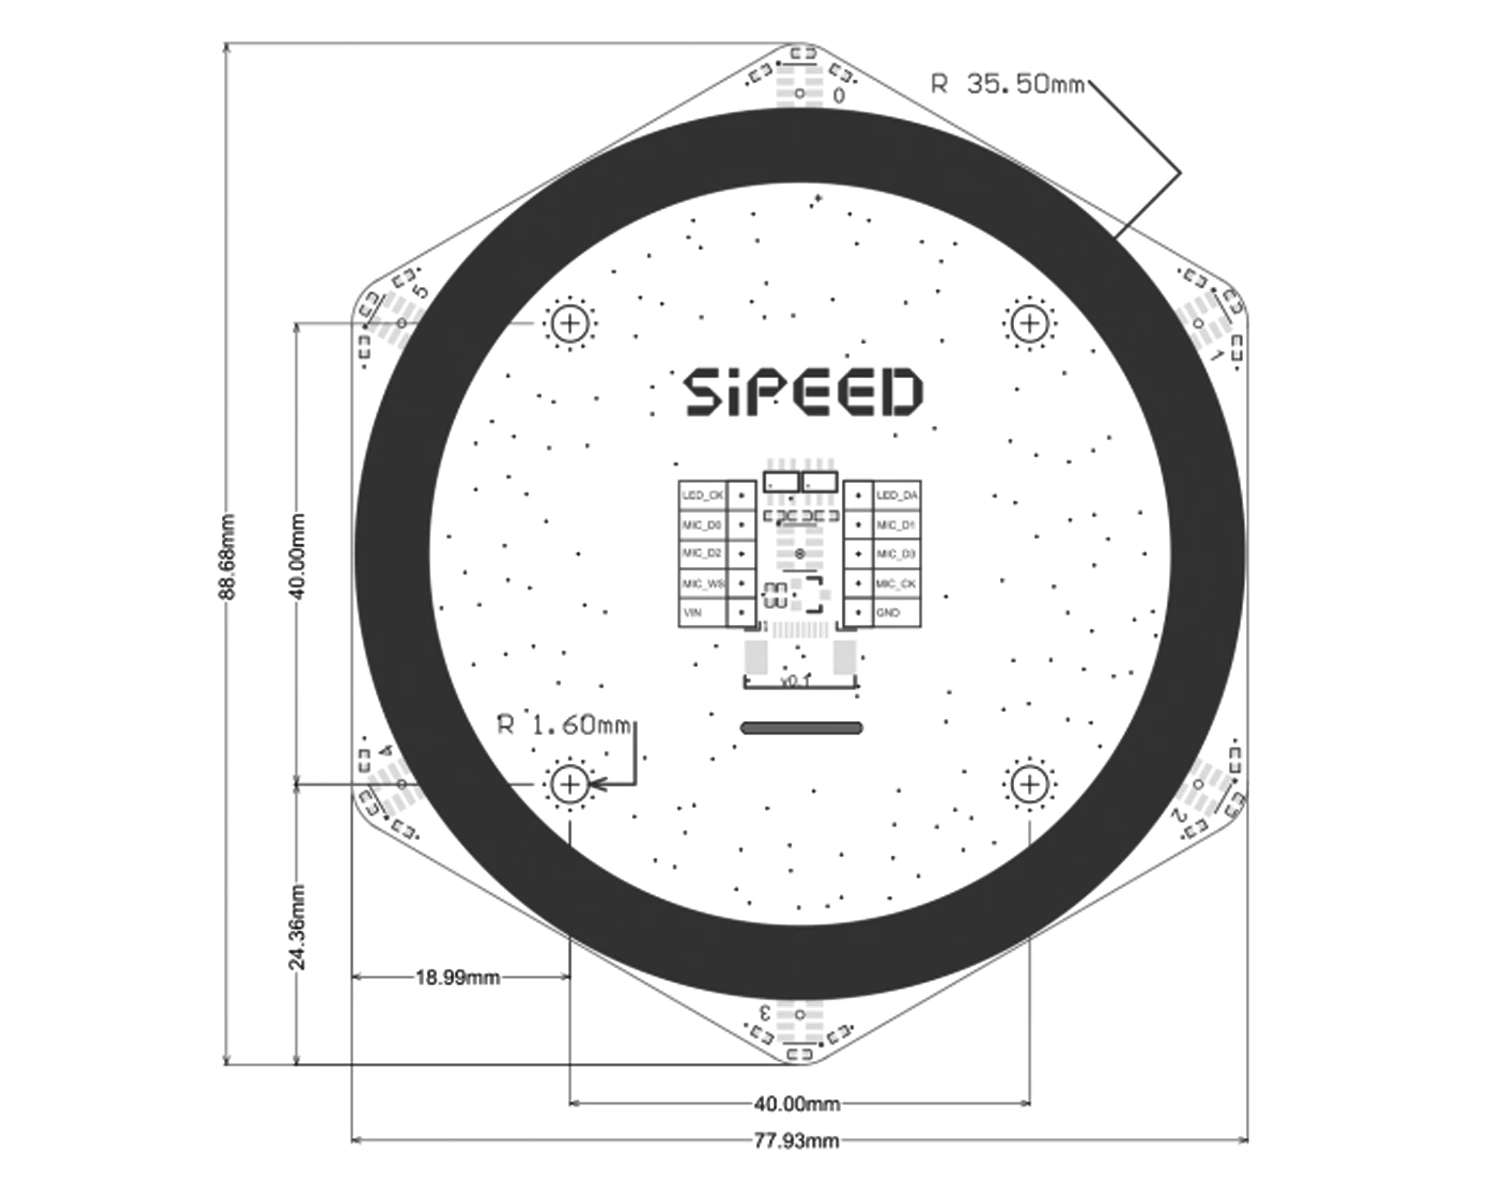 Sipeed 6+1 Mic Array Module, Sound Source Localization, Beamforming, Speech Recognition